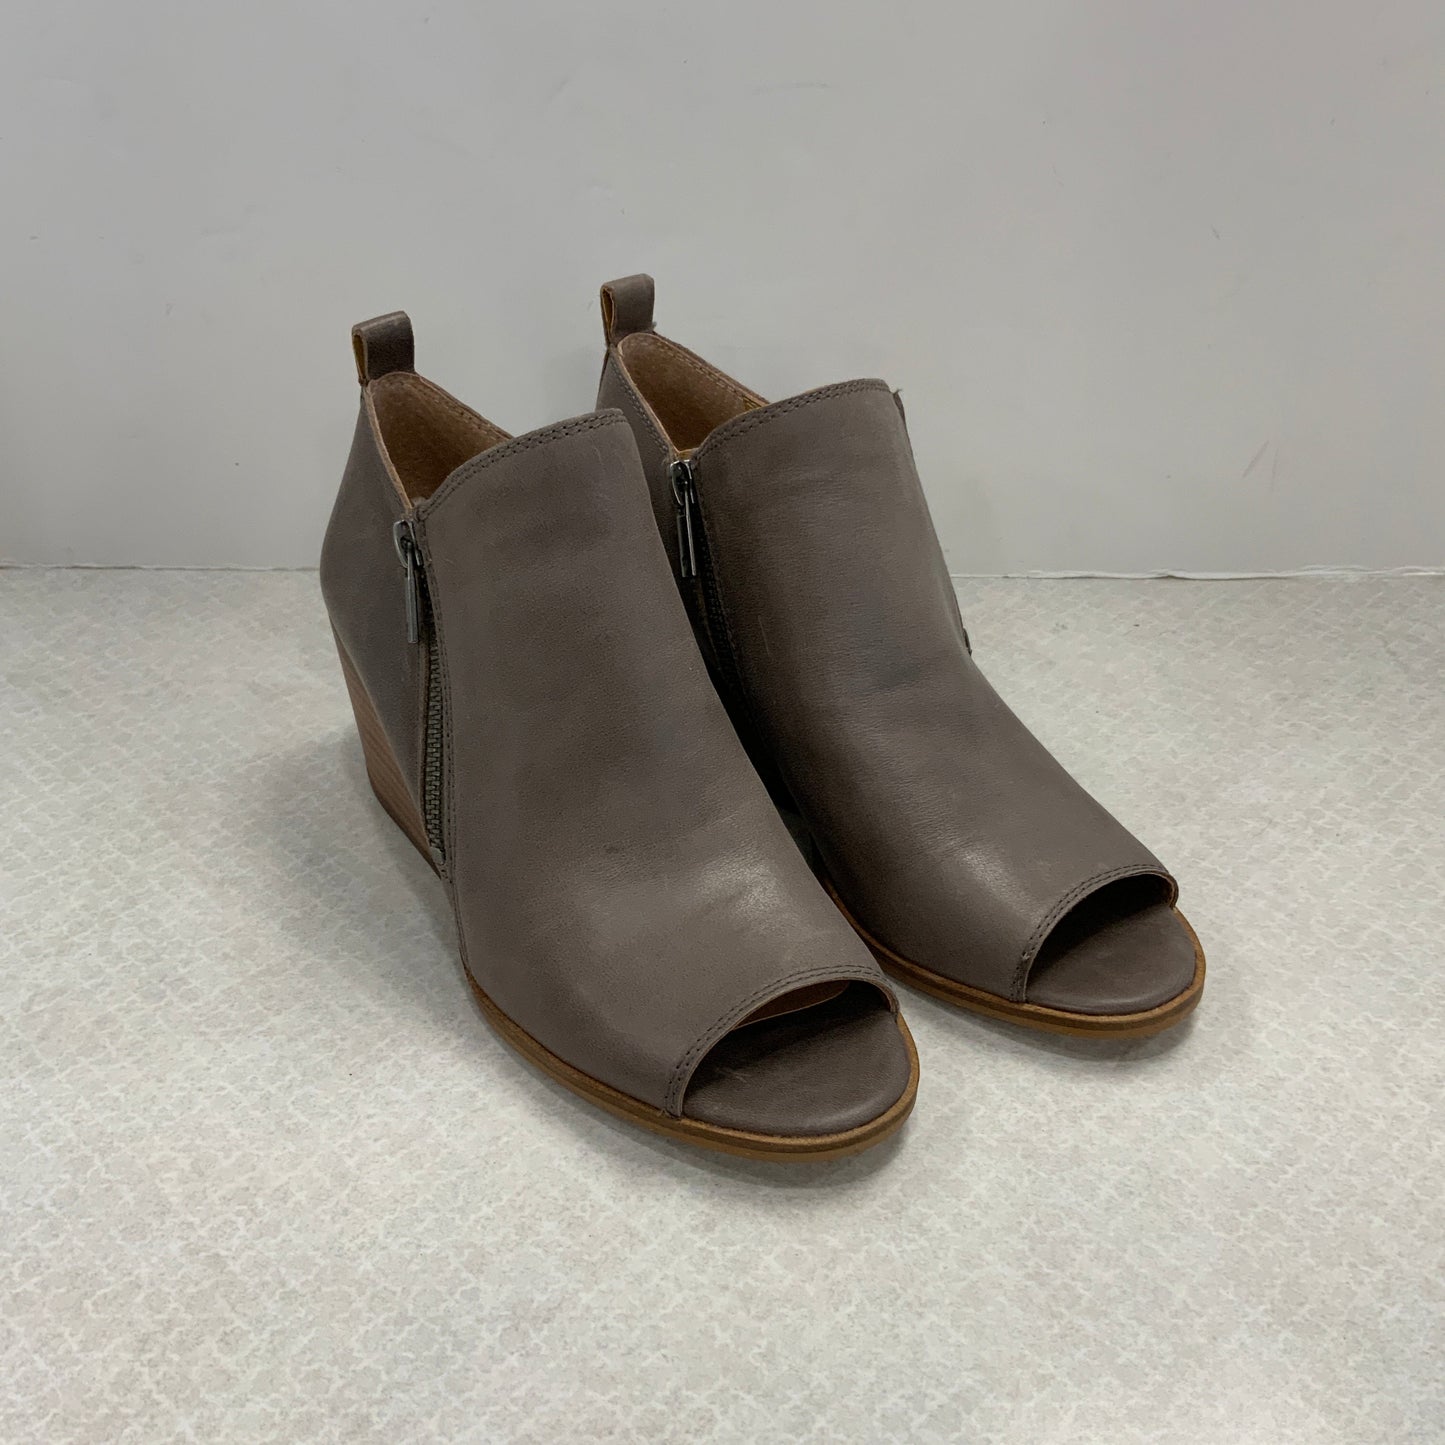 Taupe Shoes Heels Block Lucky Brand, Size 7.5